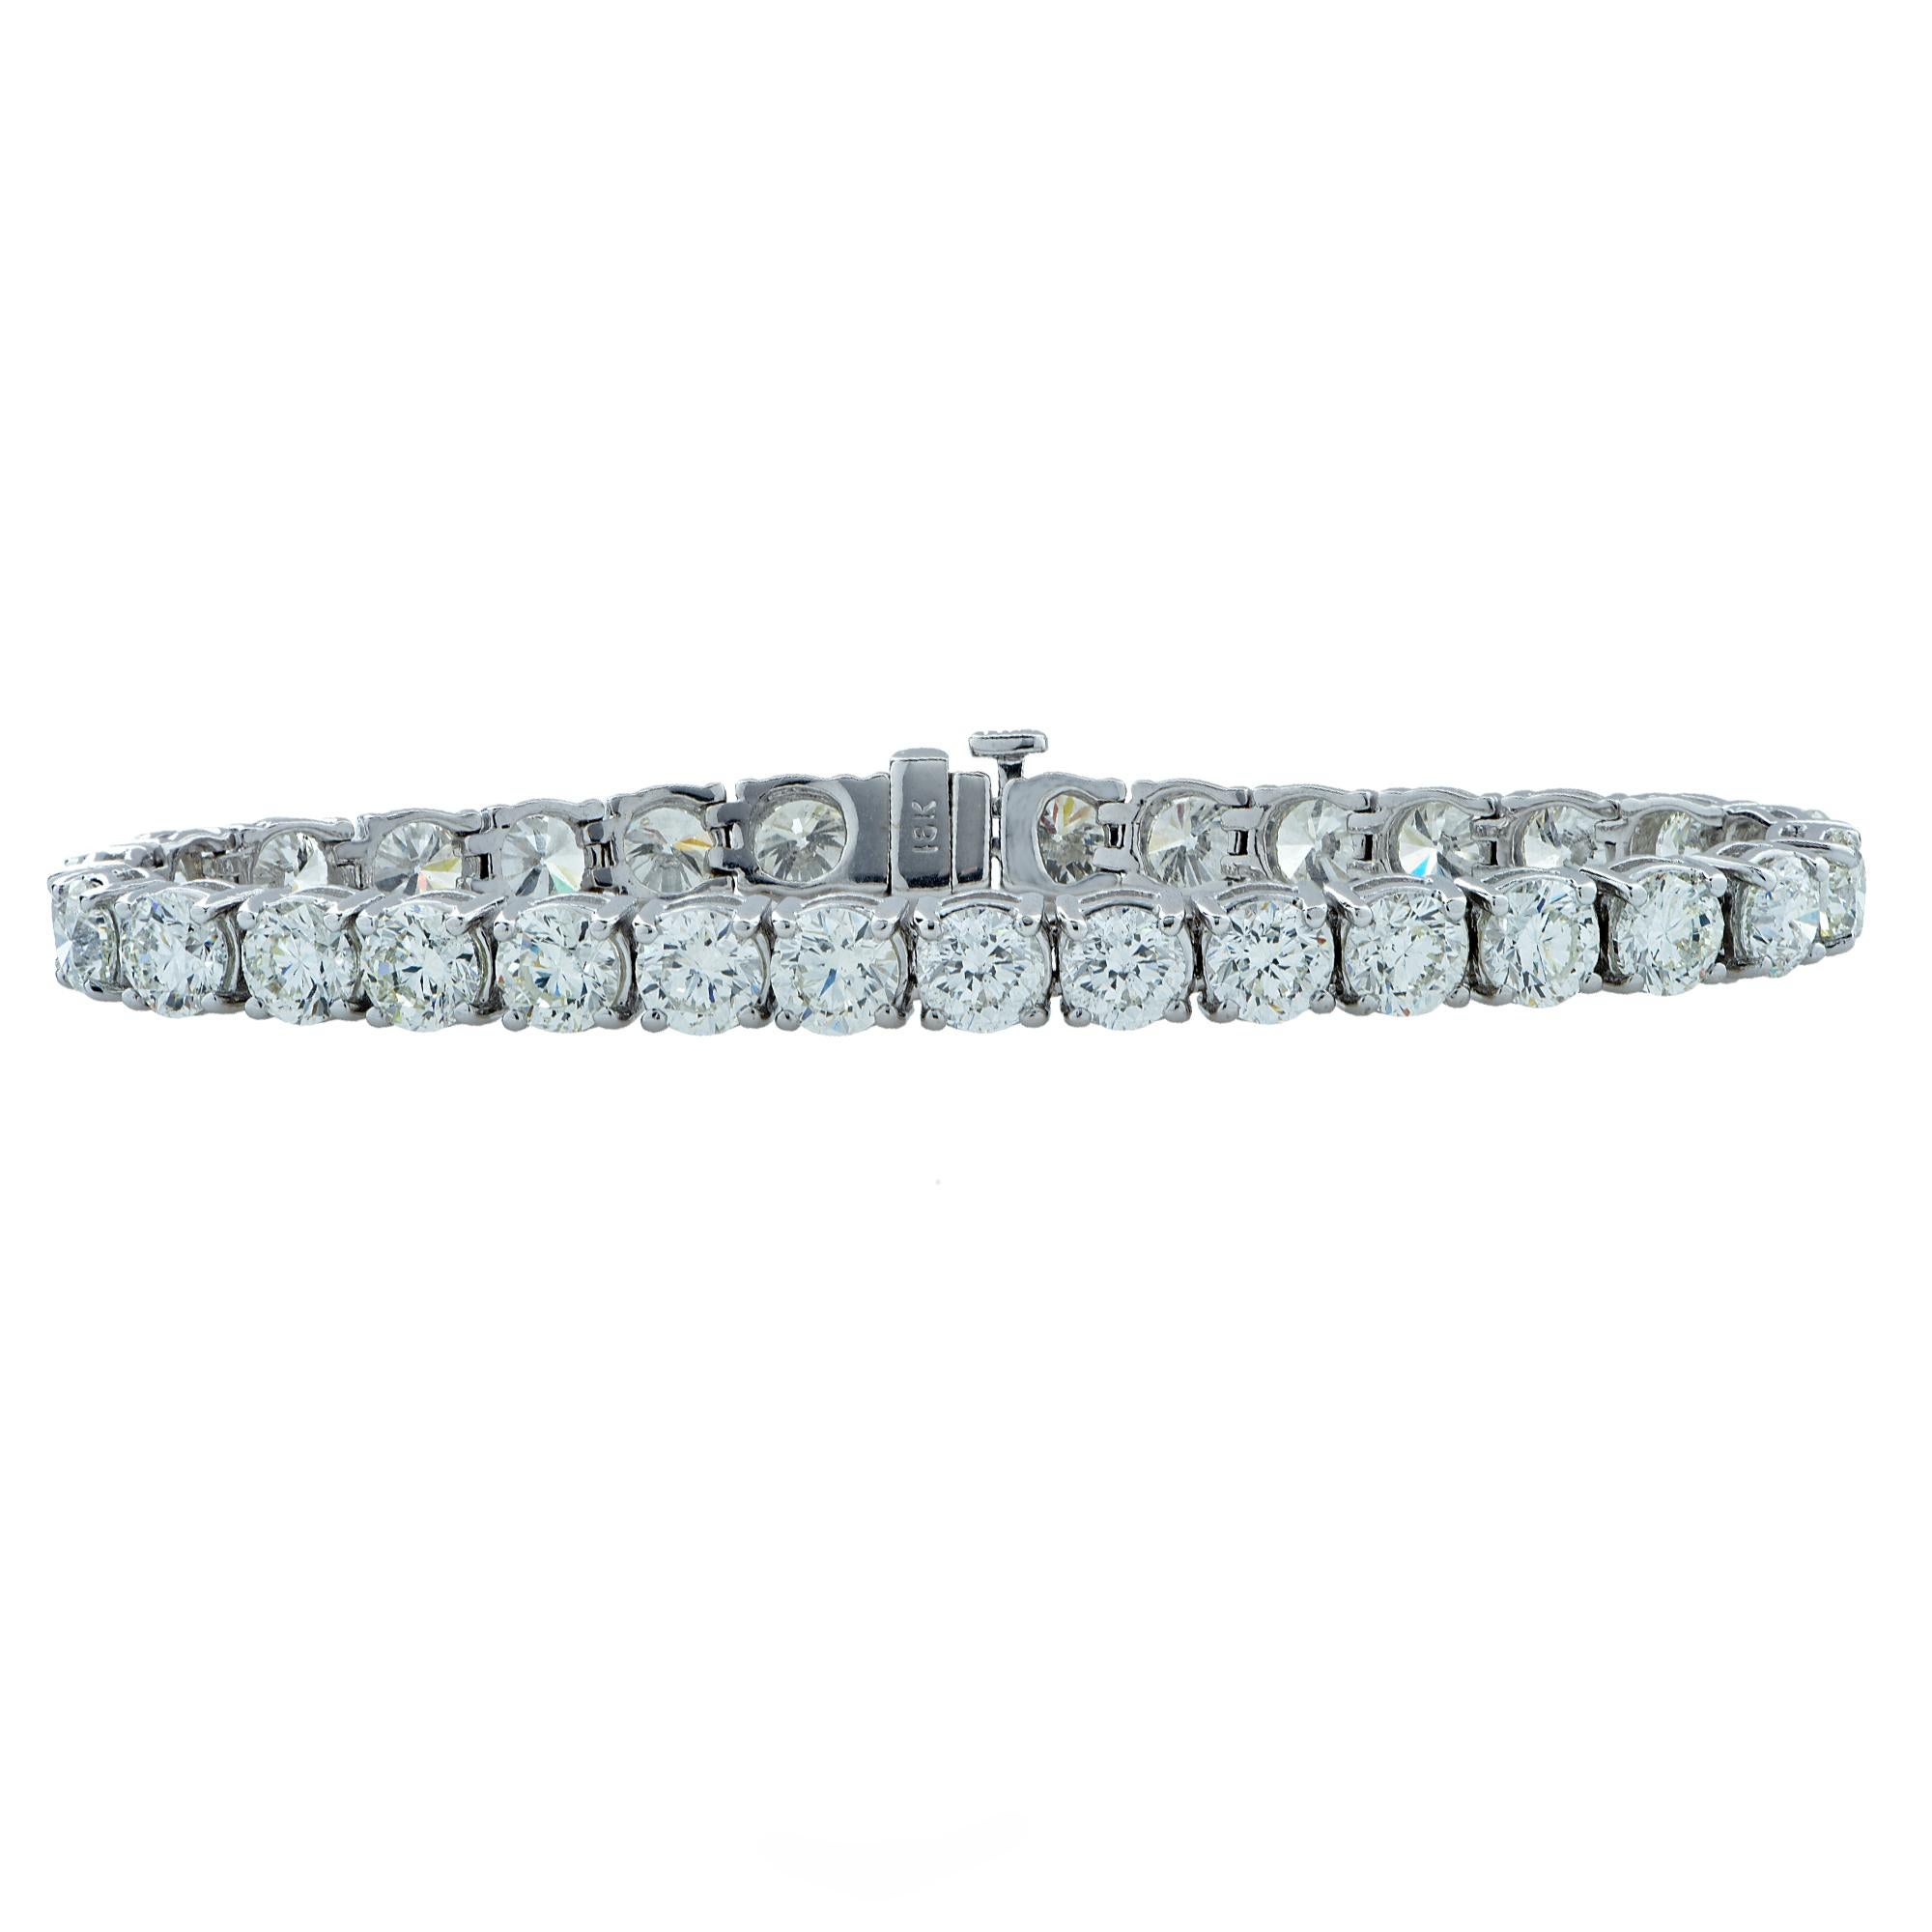 Envelop your wrist in a seamless eternity of diamonds with this spectacular diamond tennis bracelet crafted in 18 karat white gold showcasing 30 round brilliant cut diamonds weighing approximately 21.33 carats total, G-H color, SI1-2 clarity. This